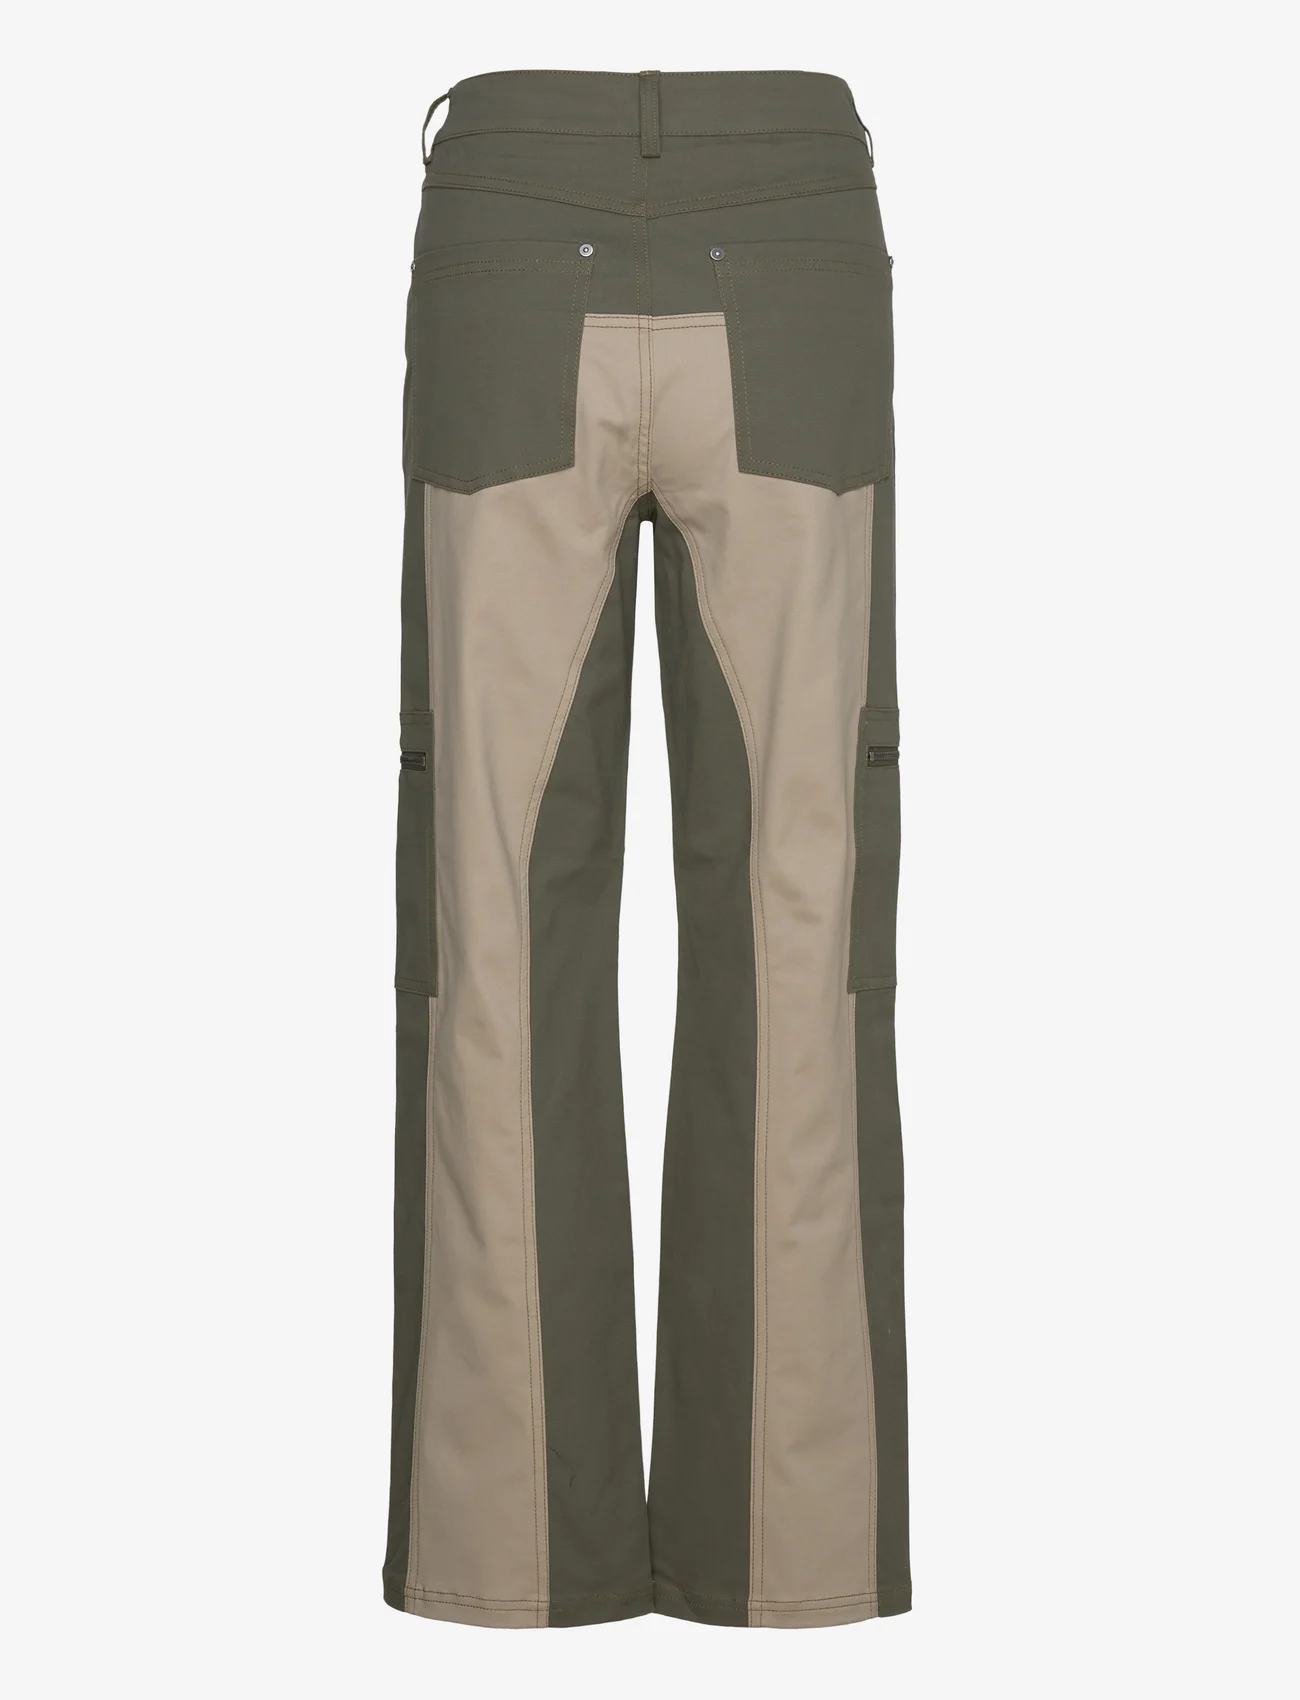 Sofie Schnoor - Trousers - wide leg jeans - army green - 1